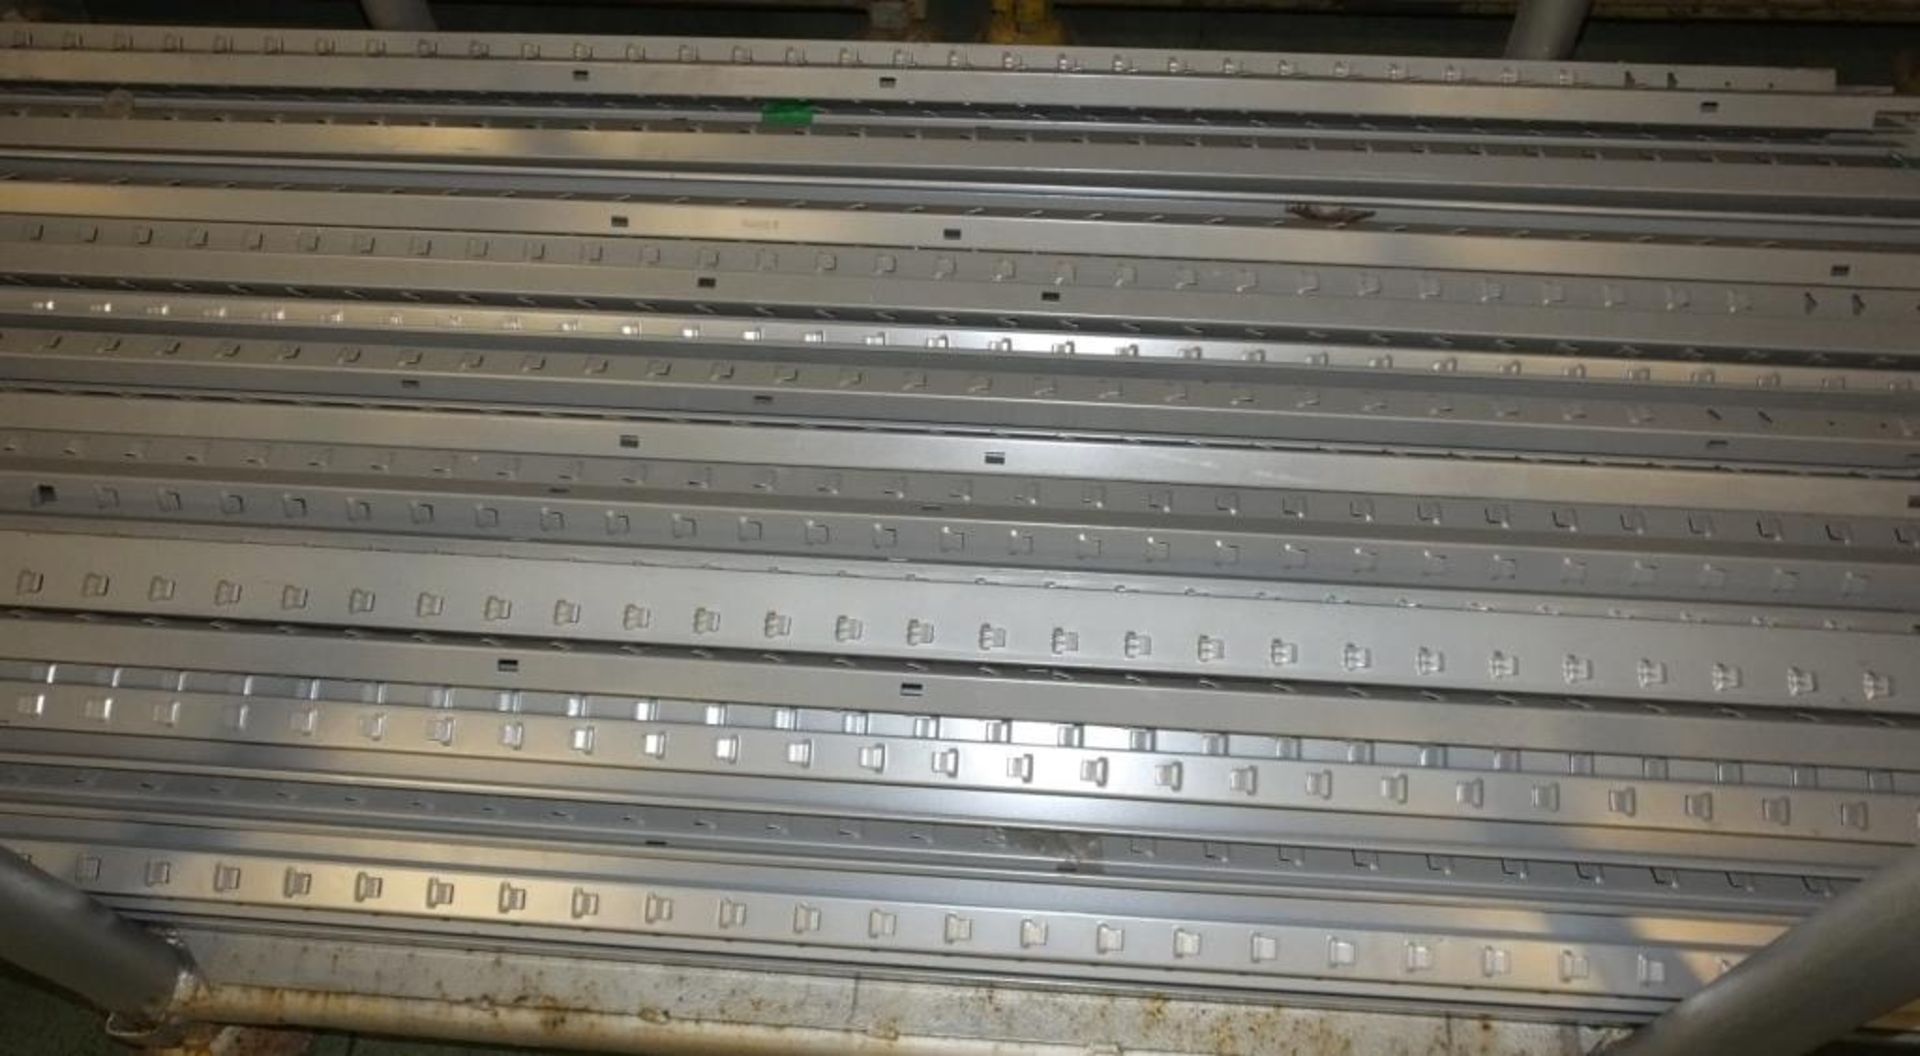 73x Gray Racking Uprights L2280 mm - Image 2 of 2